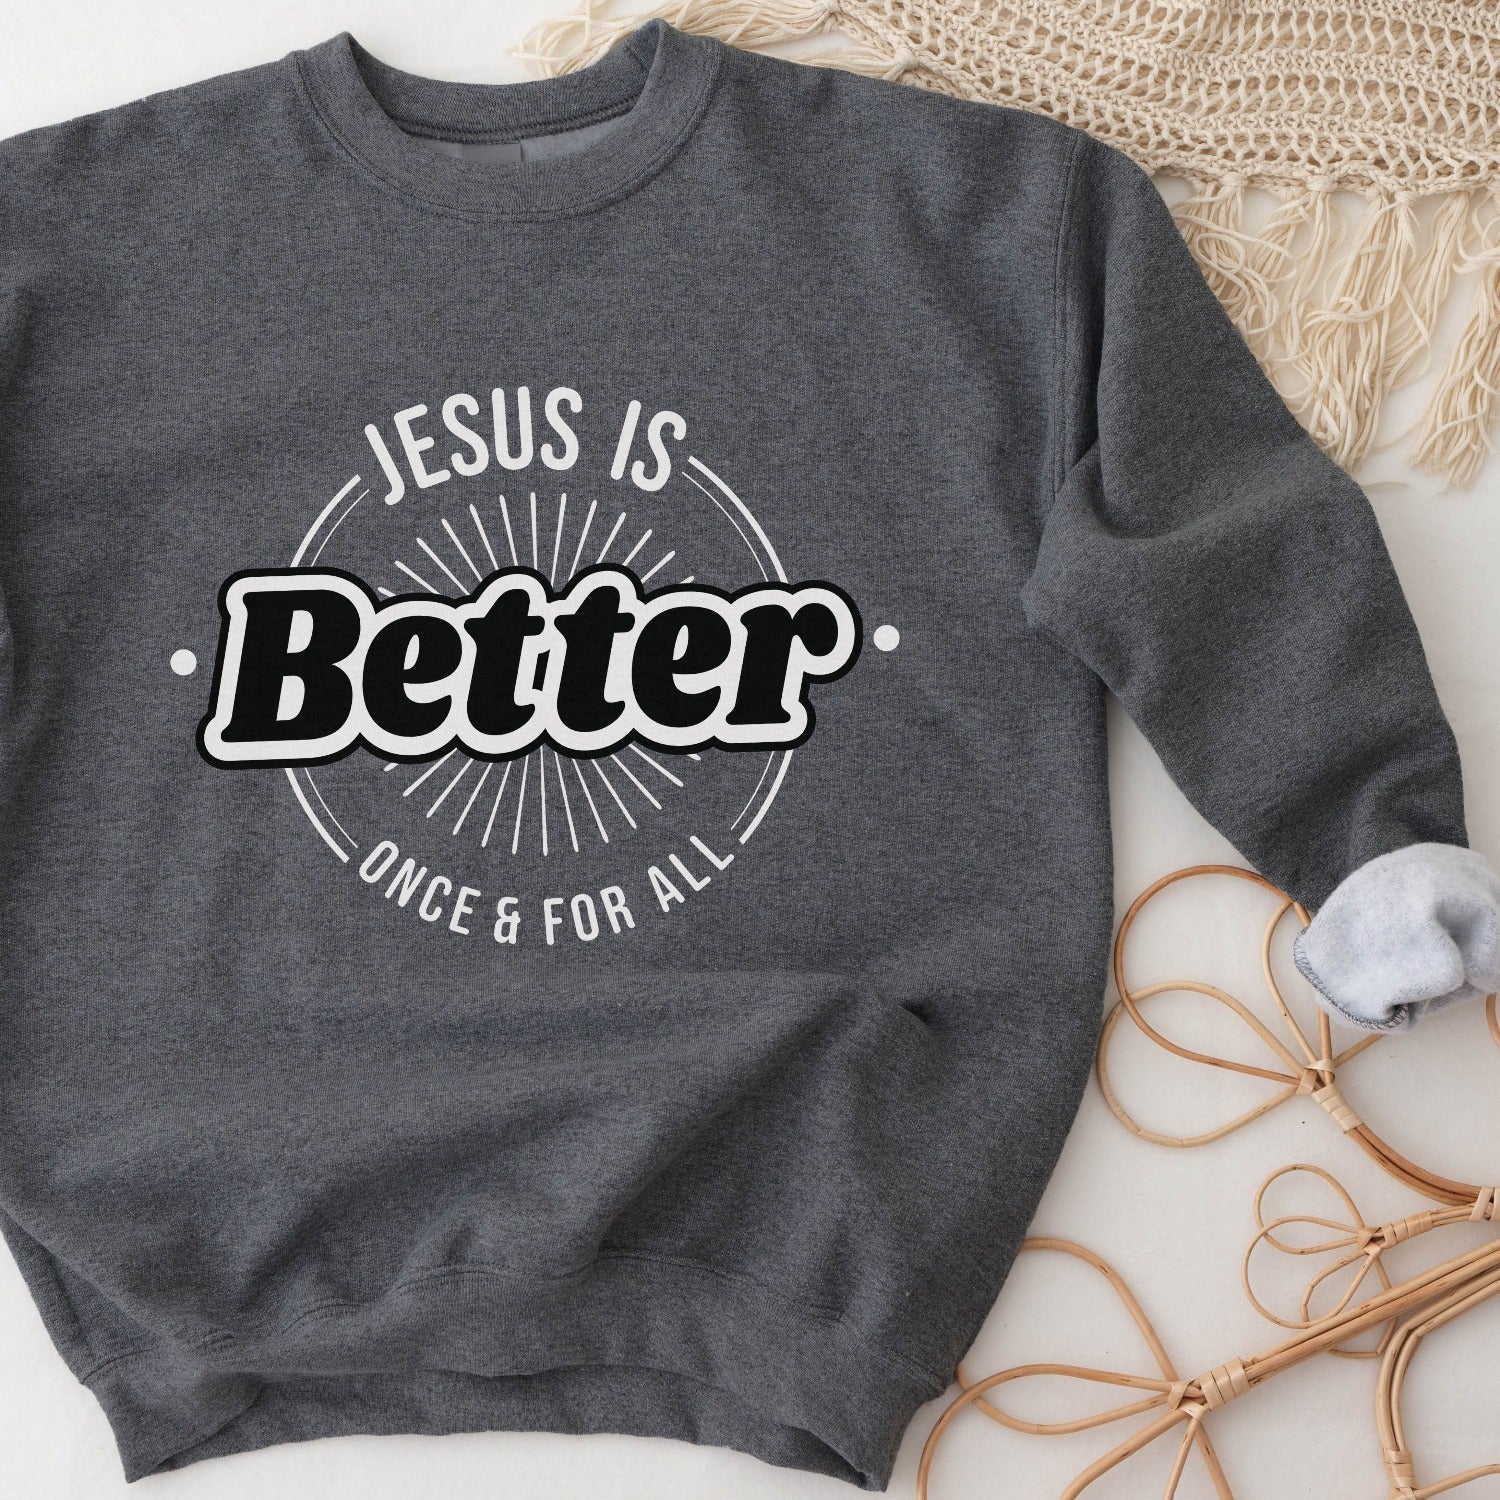 Heather dark gray faith-based cozy sweatshirt with "Jesus is BETTER - Once and For All" logo style design in white and black, created for Christian men and women